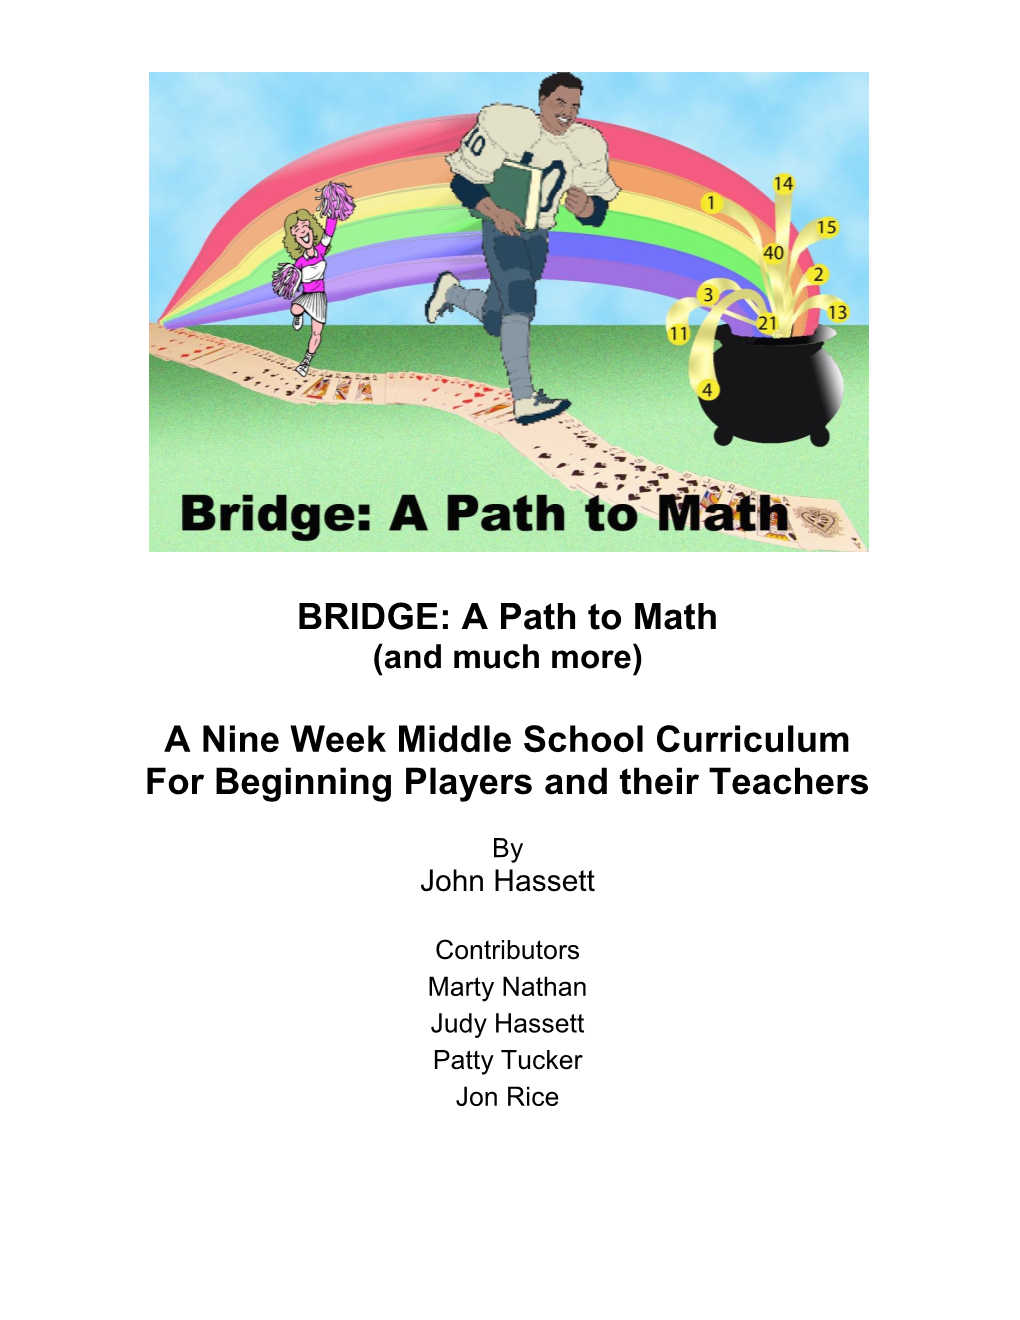 BRIDGE: a Path to Math a Nine Week Middle School Curriculum for Beginning Players and Their Teachers